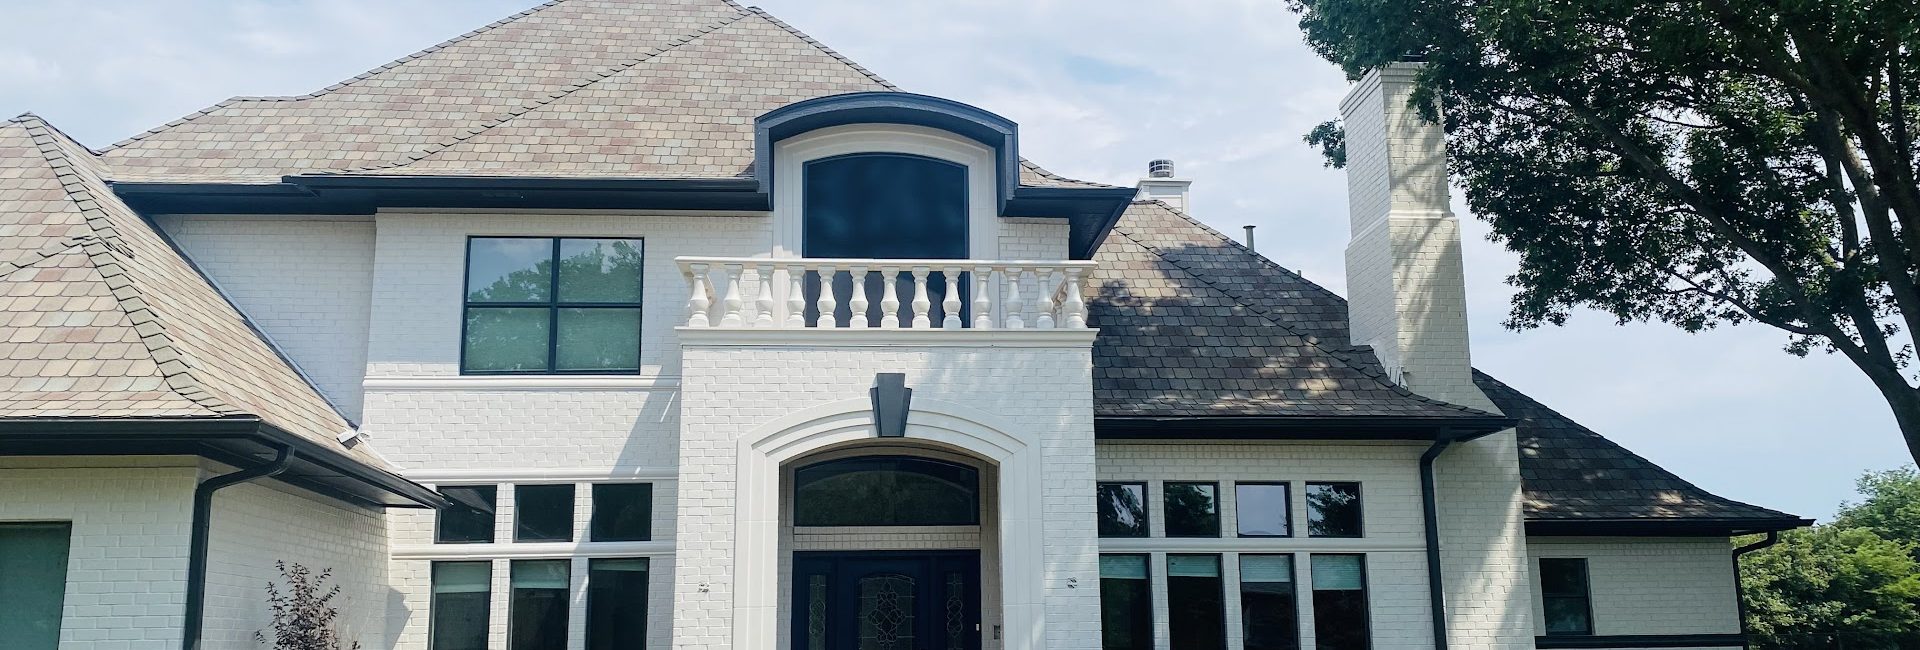 CertaPro Painters of Lewisville/Flower Mound, TX 2